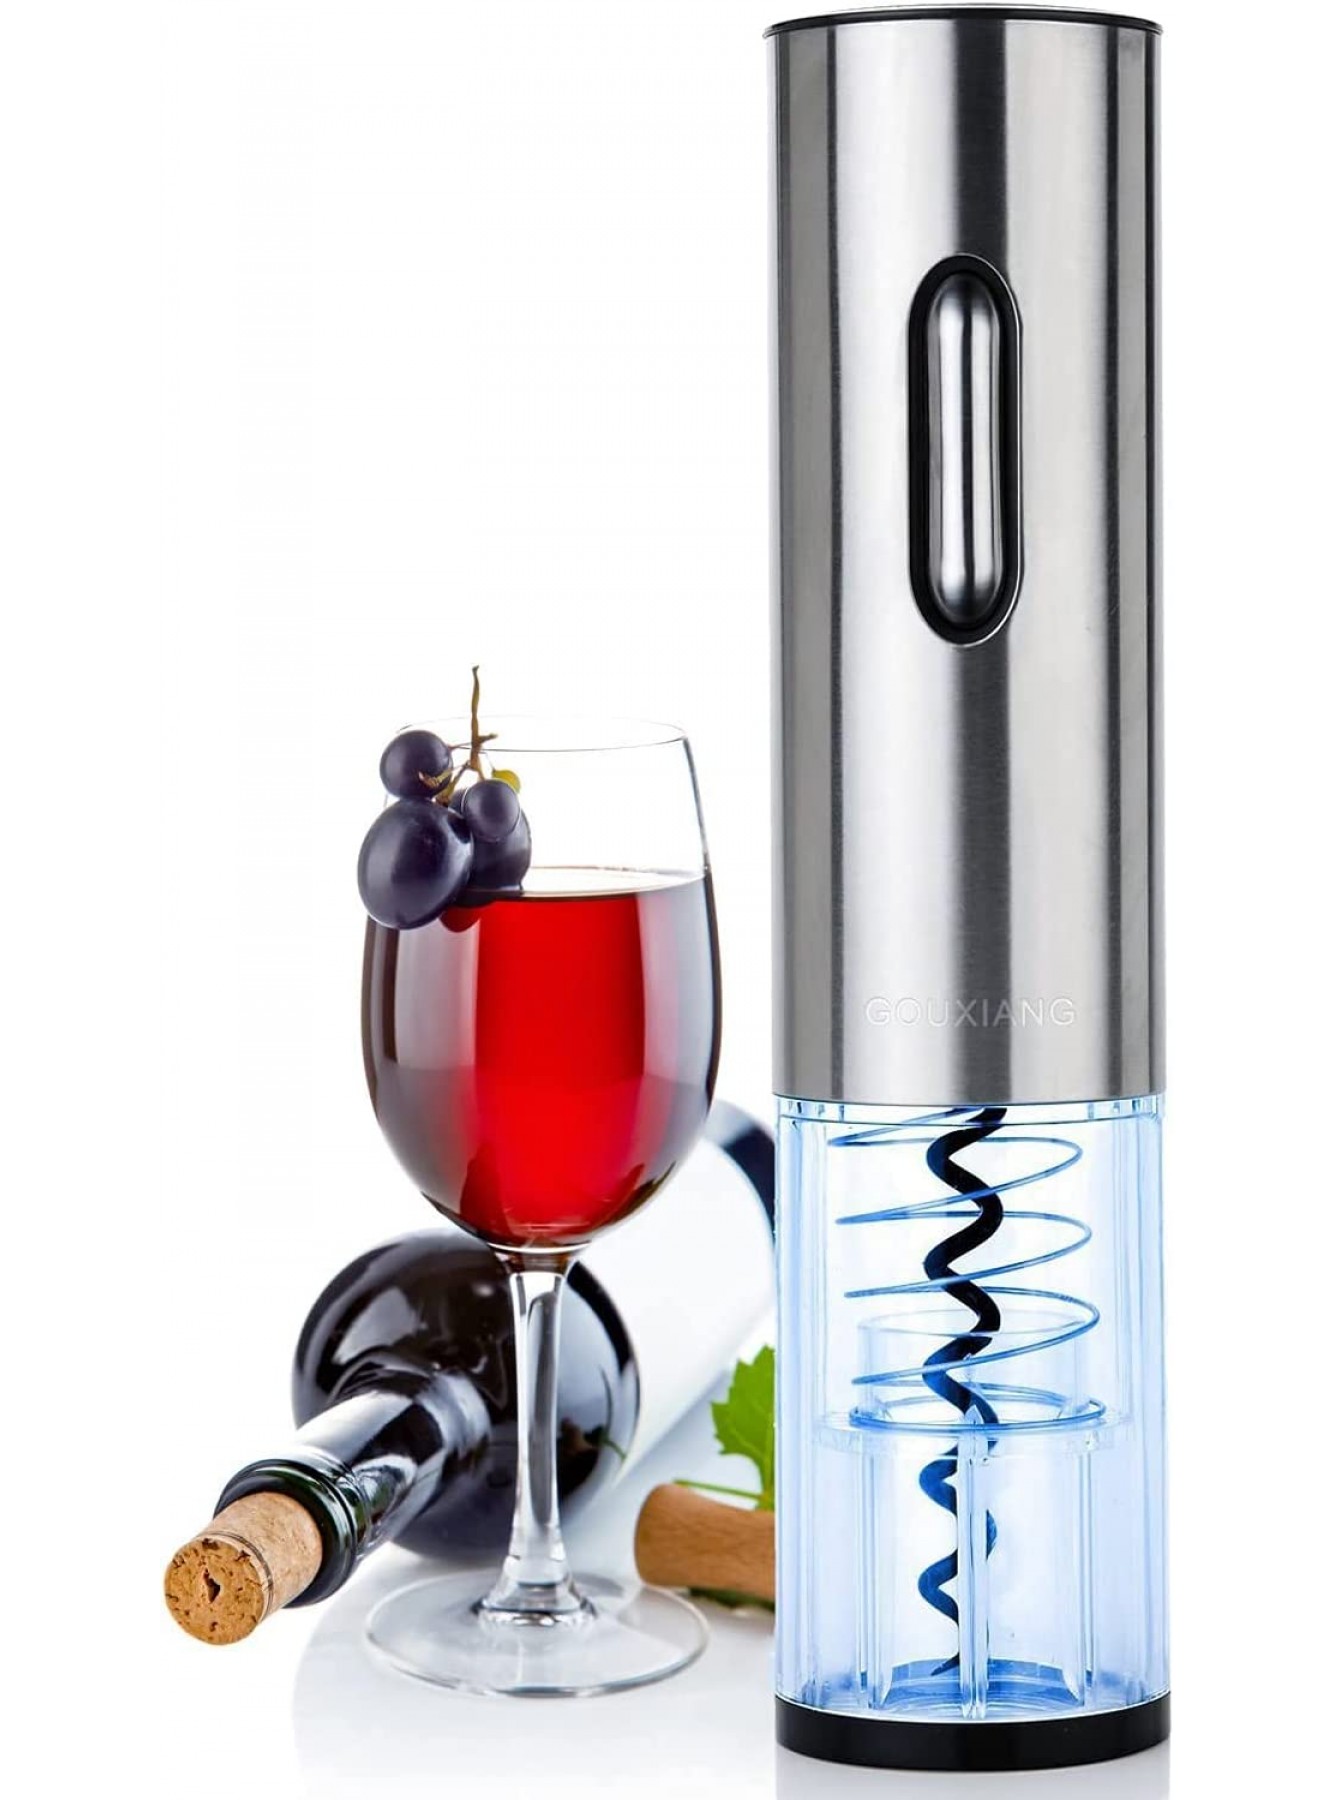 Wine Opener Electric GOSCIEN Automatic Electric Wine Bottle Opener Gifts For Festivals Birthdays Electric Wine Bottle Corkscrew with Foil Cutter Indicator Light Stainless Steel B07PWVGVB4